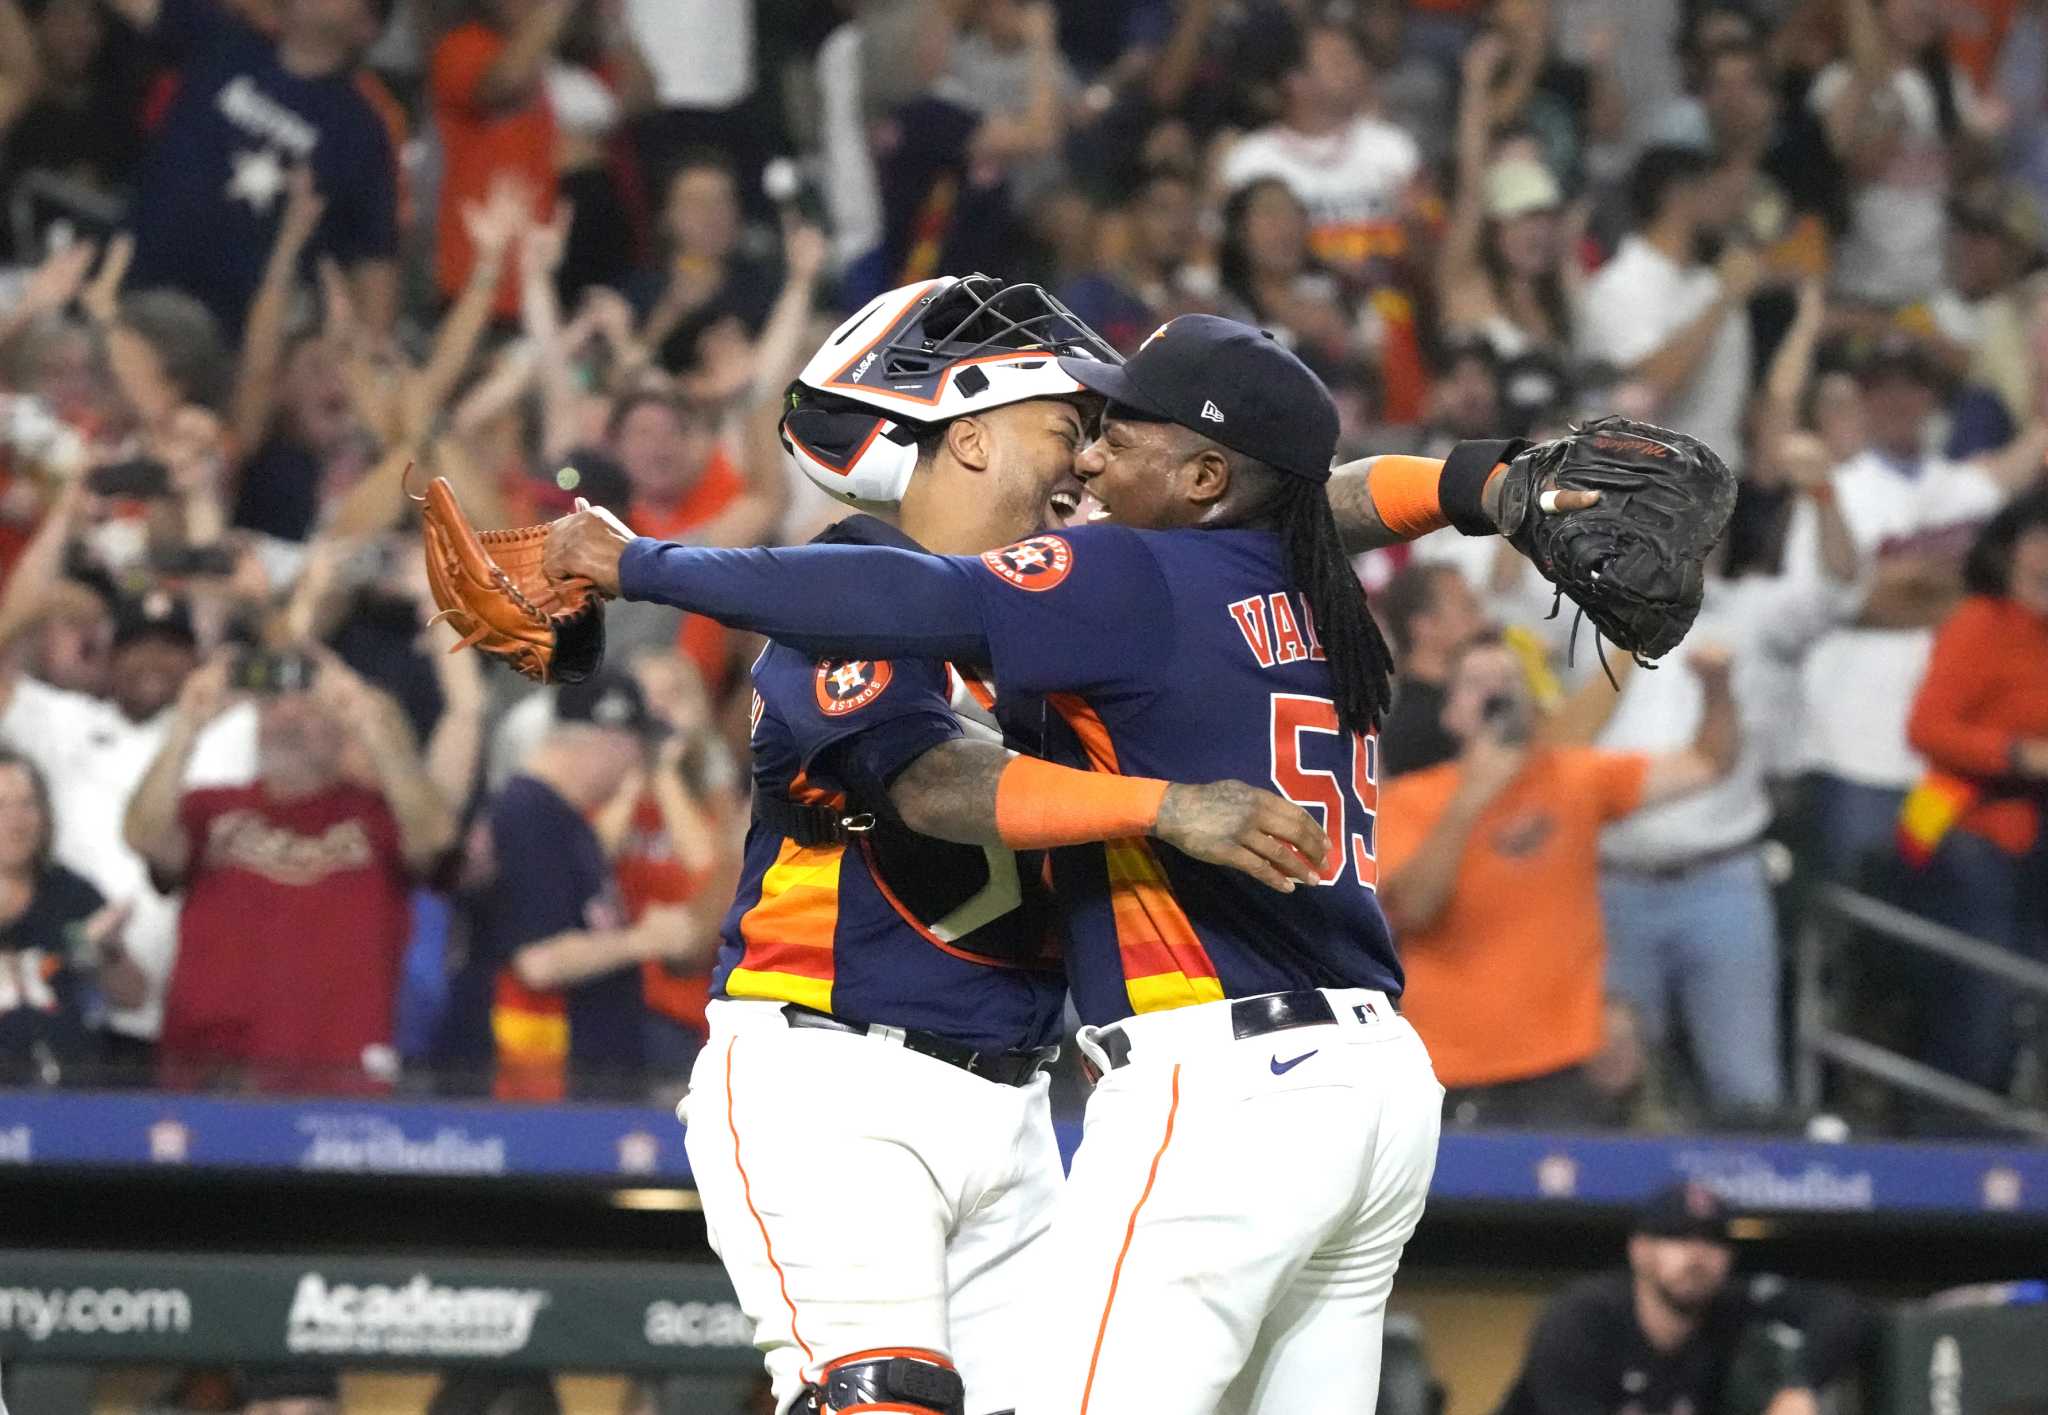 Astros World Series: All 32 Houston-area Academy Sports + Outdoors